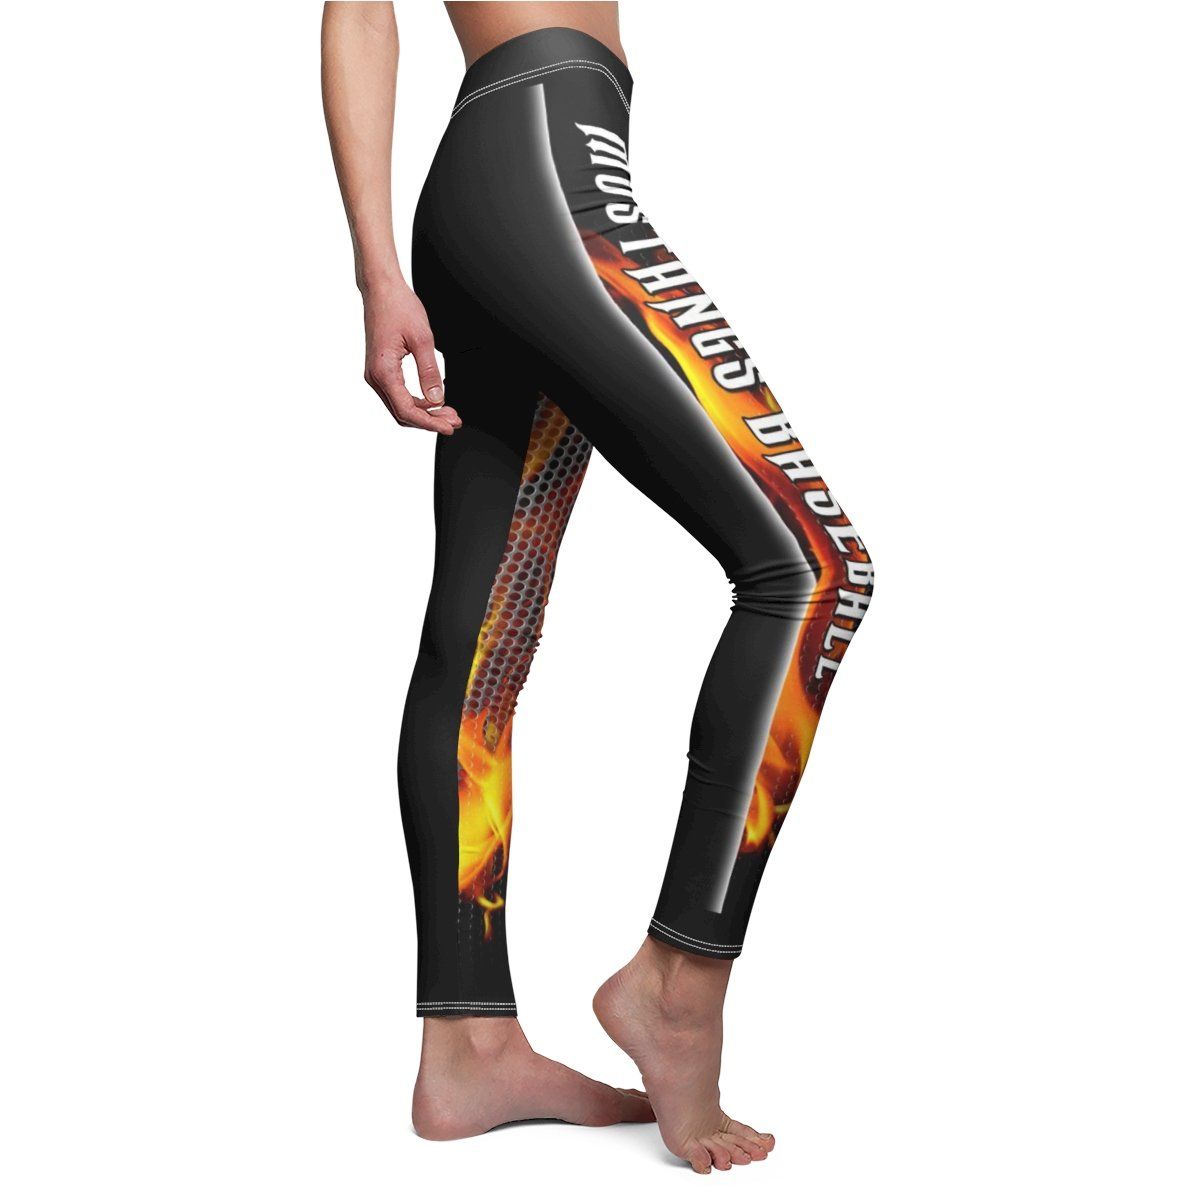 Bracket - V.4 - Extreme Sportswear Cut & Sew Leggings Template-Photoshop Template - Photo Solutions